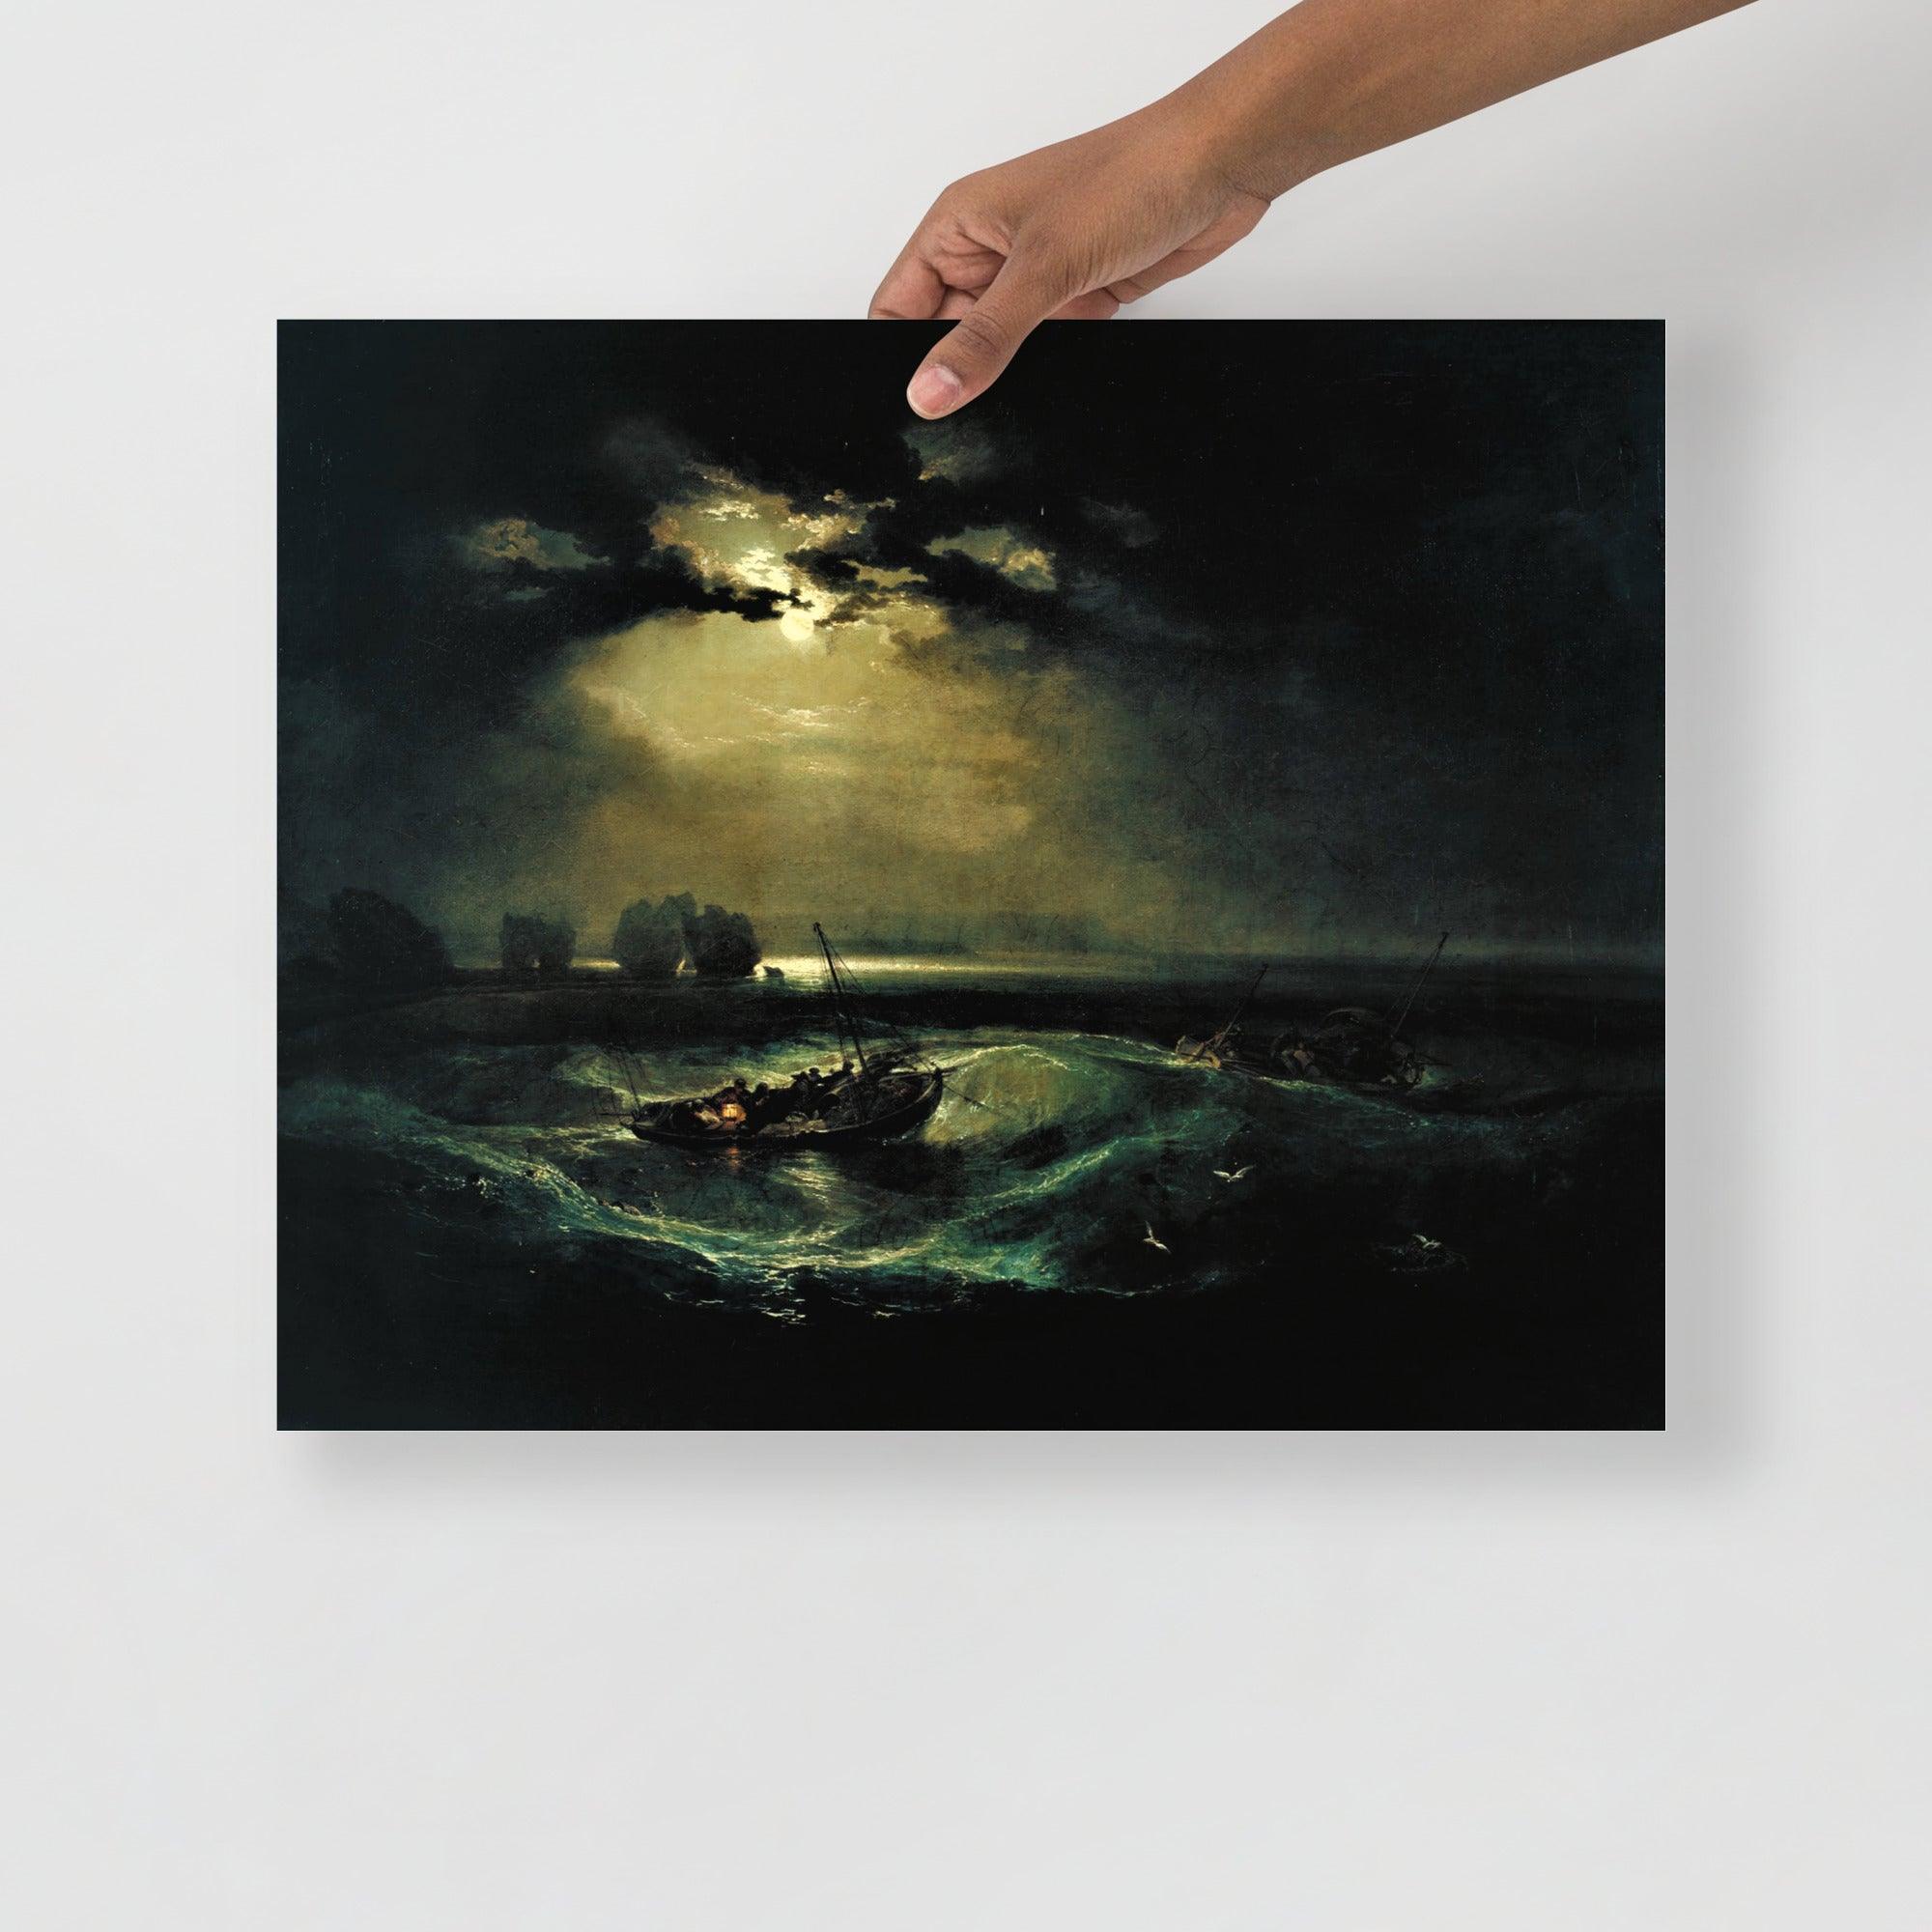 A Fishermen at Sea by William Turner poster on a plain backdrop in size 16x20”.